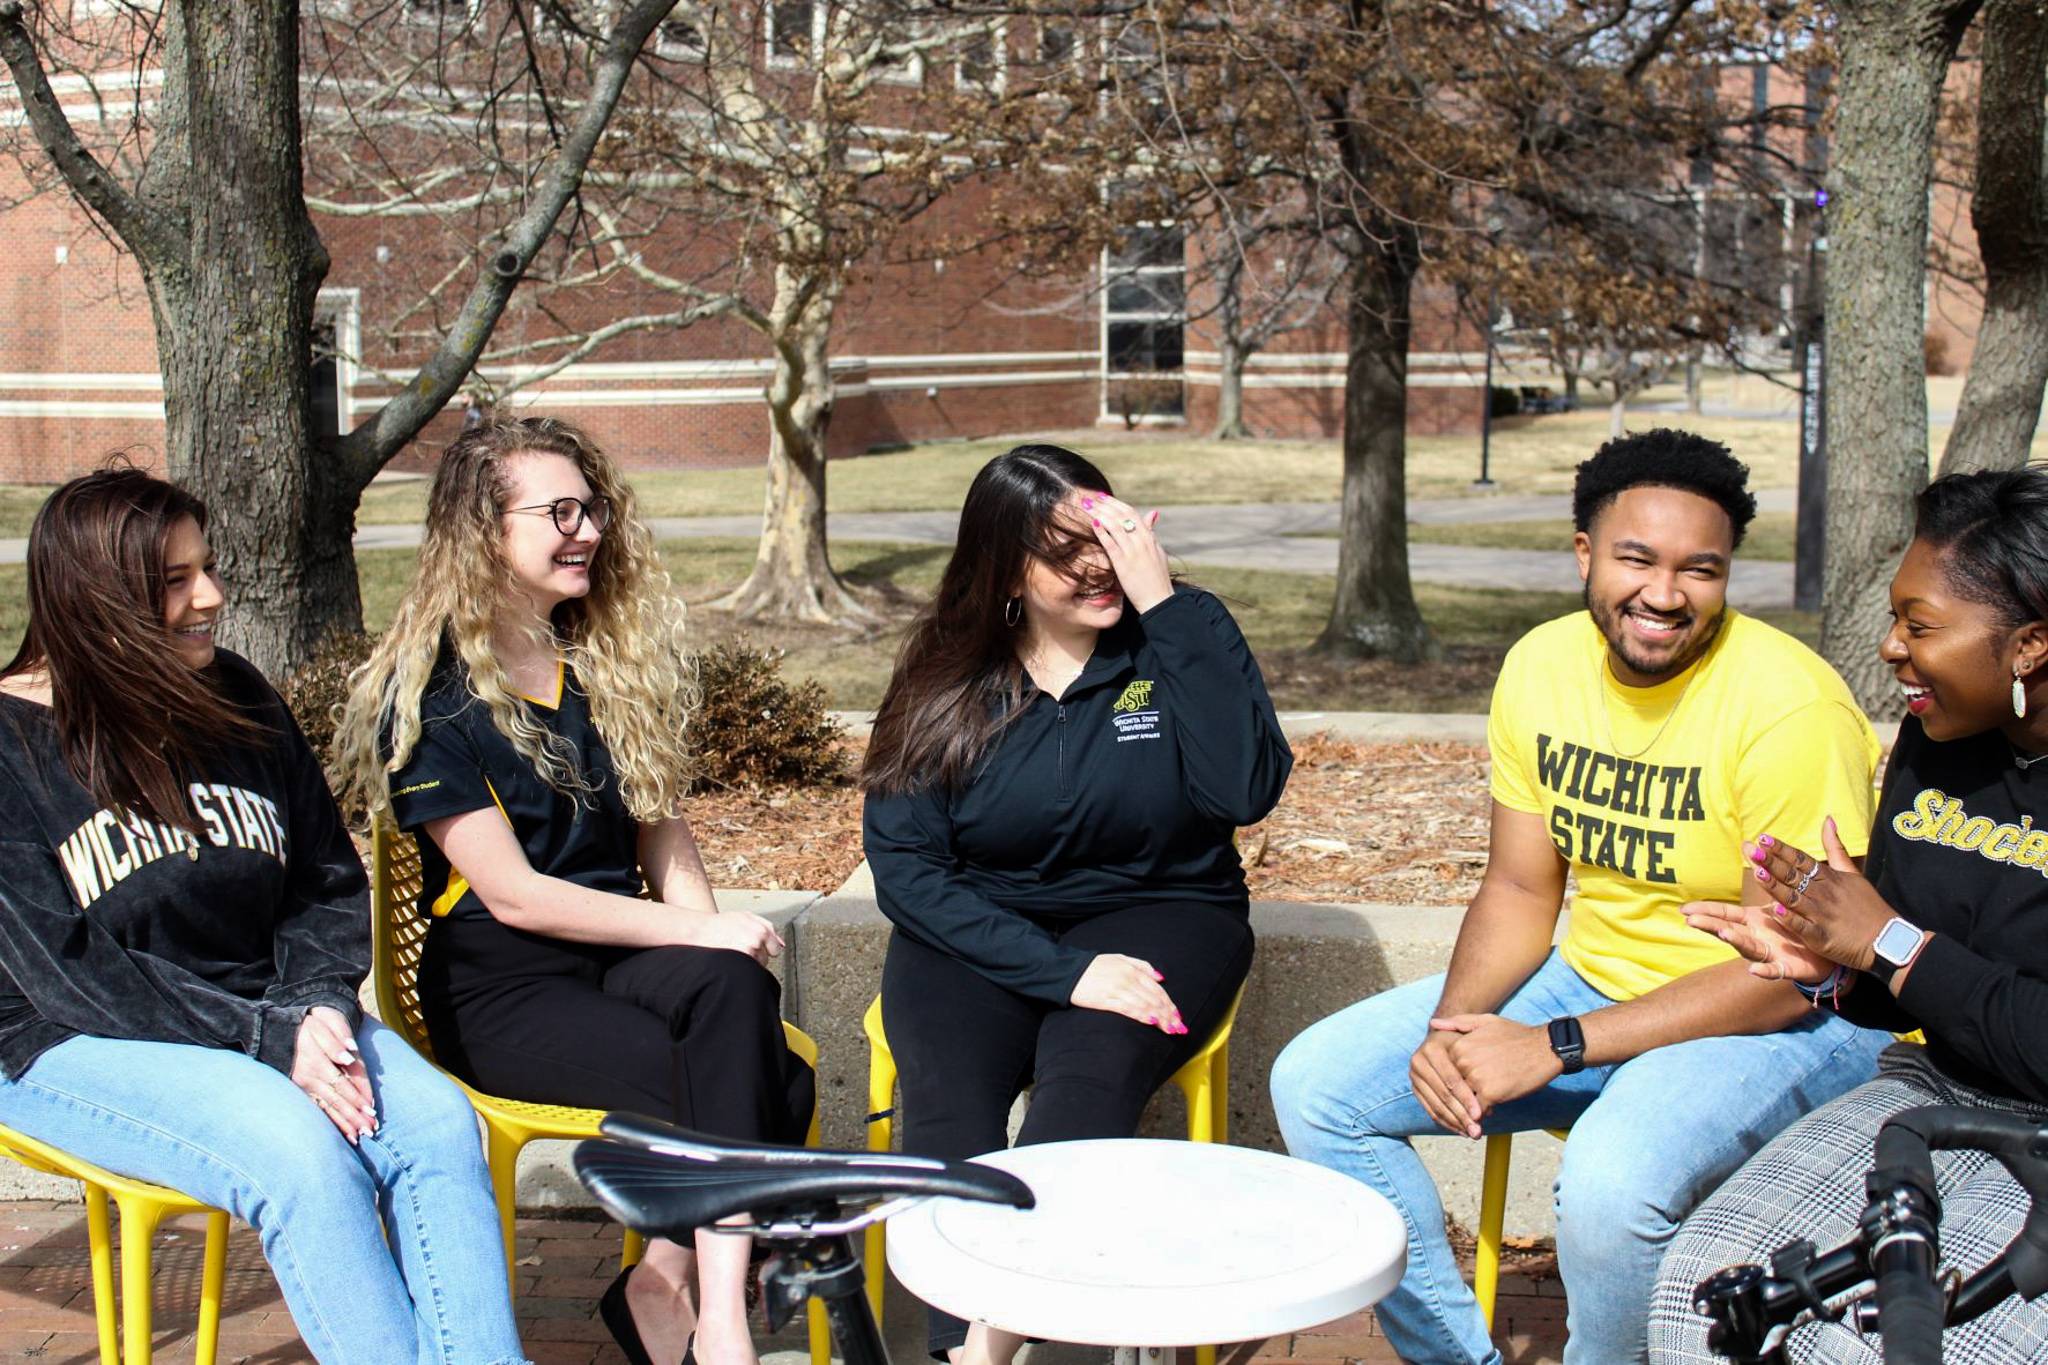 Higher Education Student Affairs students sit outdoors and talk to one another